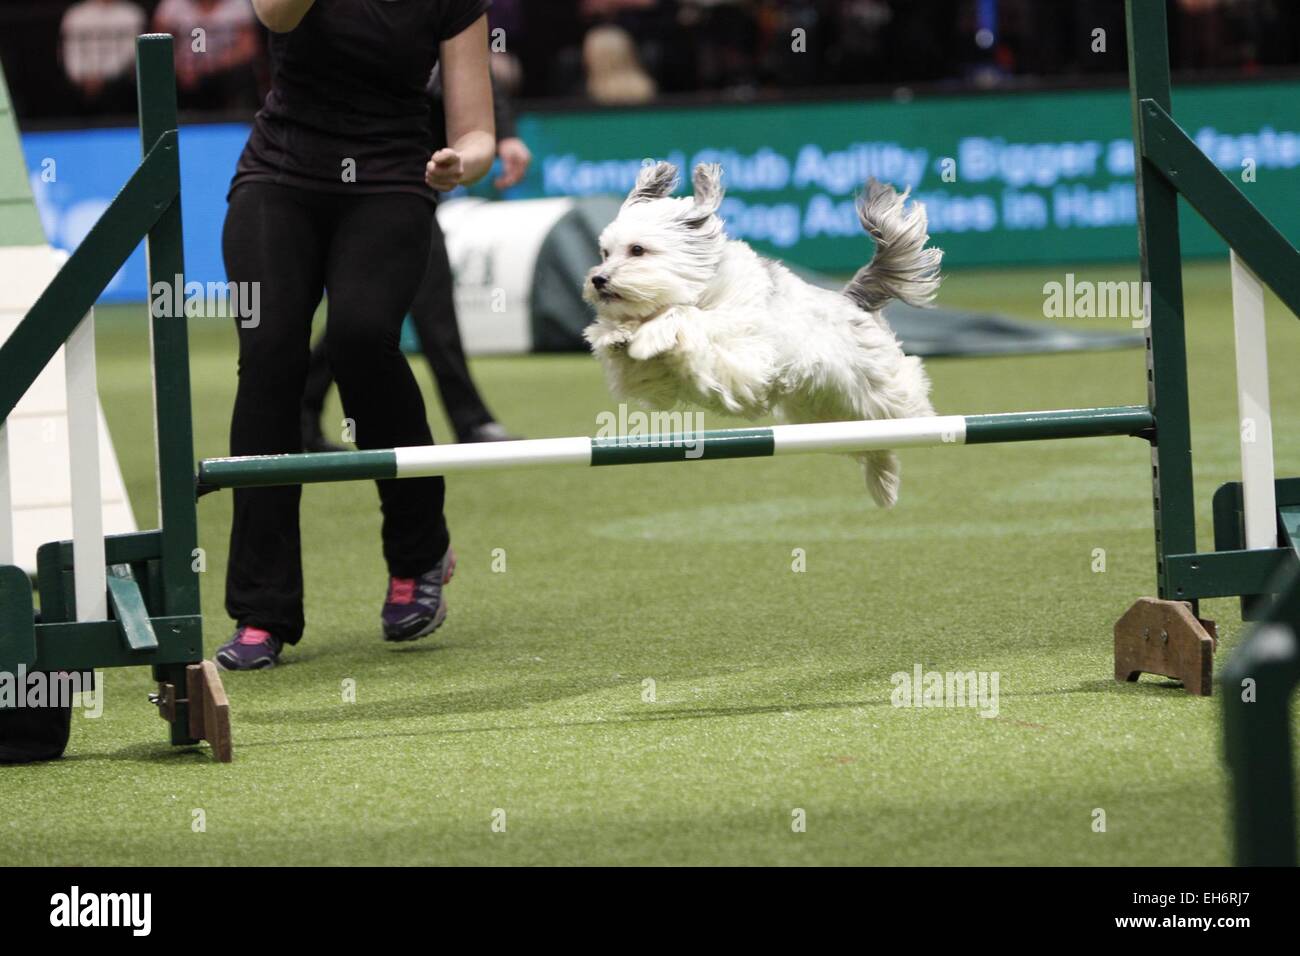 Birmingham, UK. 8th March, 2015. Pudsey, winner of Britains Got Talent taking part in the Agility final at Crufts today in Birmingham, UK. Credit:  Jon Freeman/Alamy Live News Stock Photo